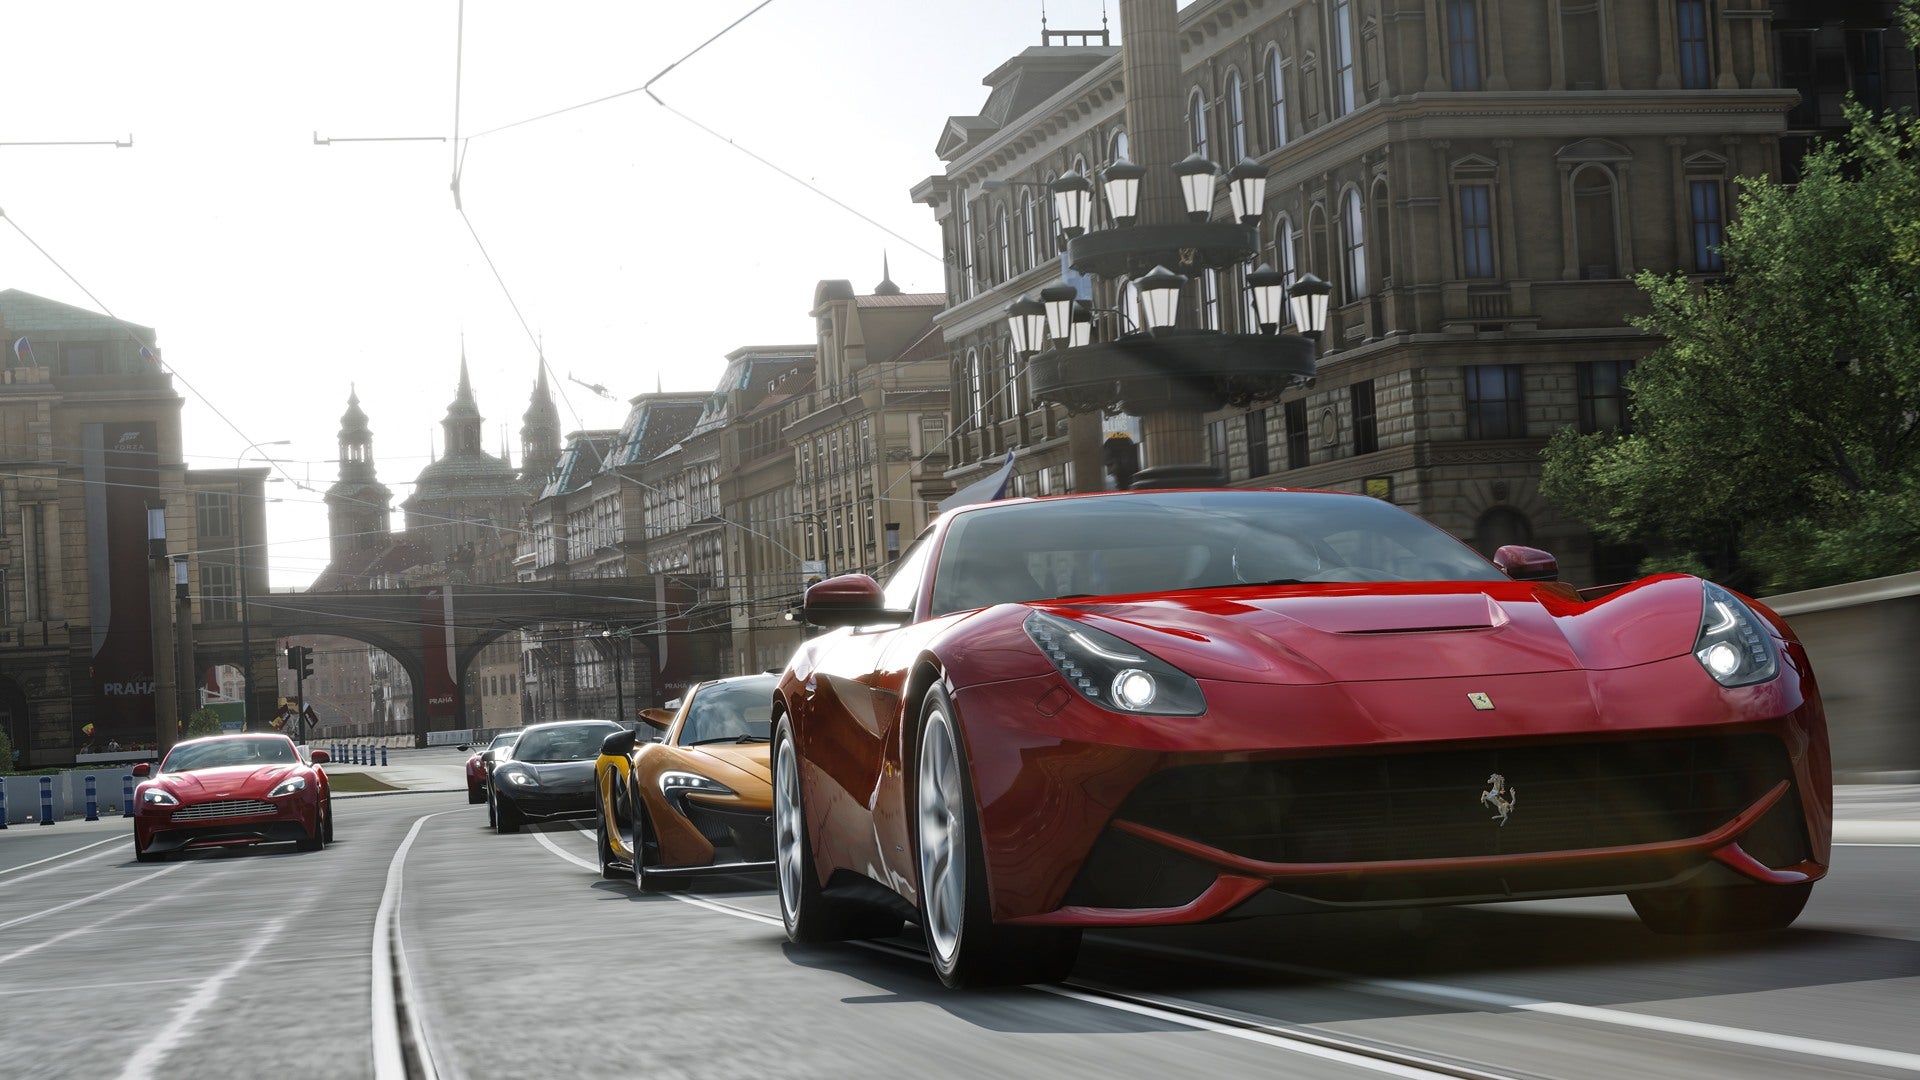 Forza 5 Racing Game of the Year Edition Revealed - IGN